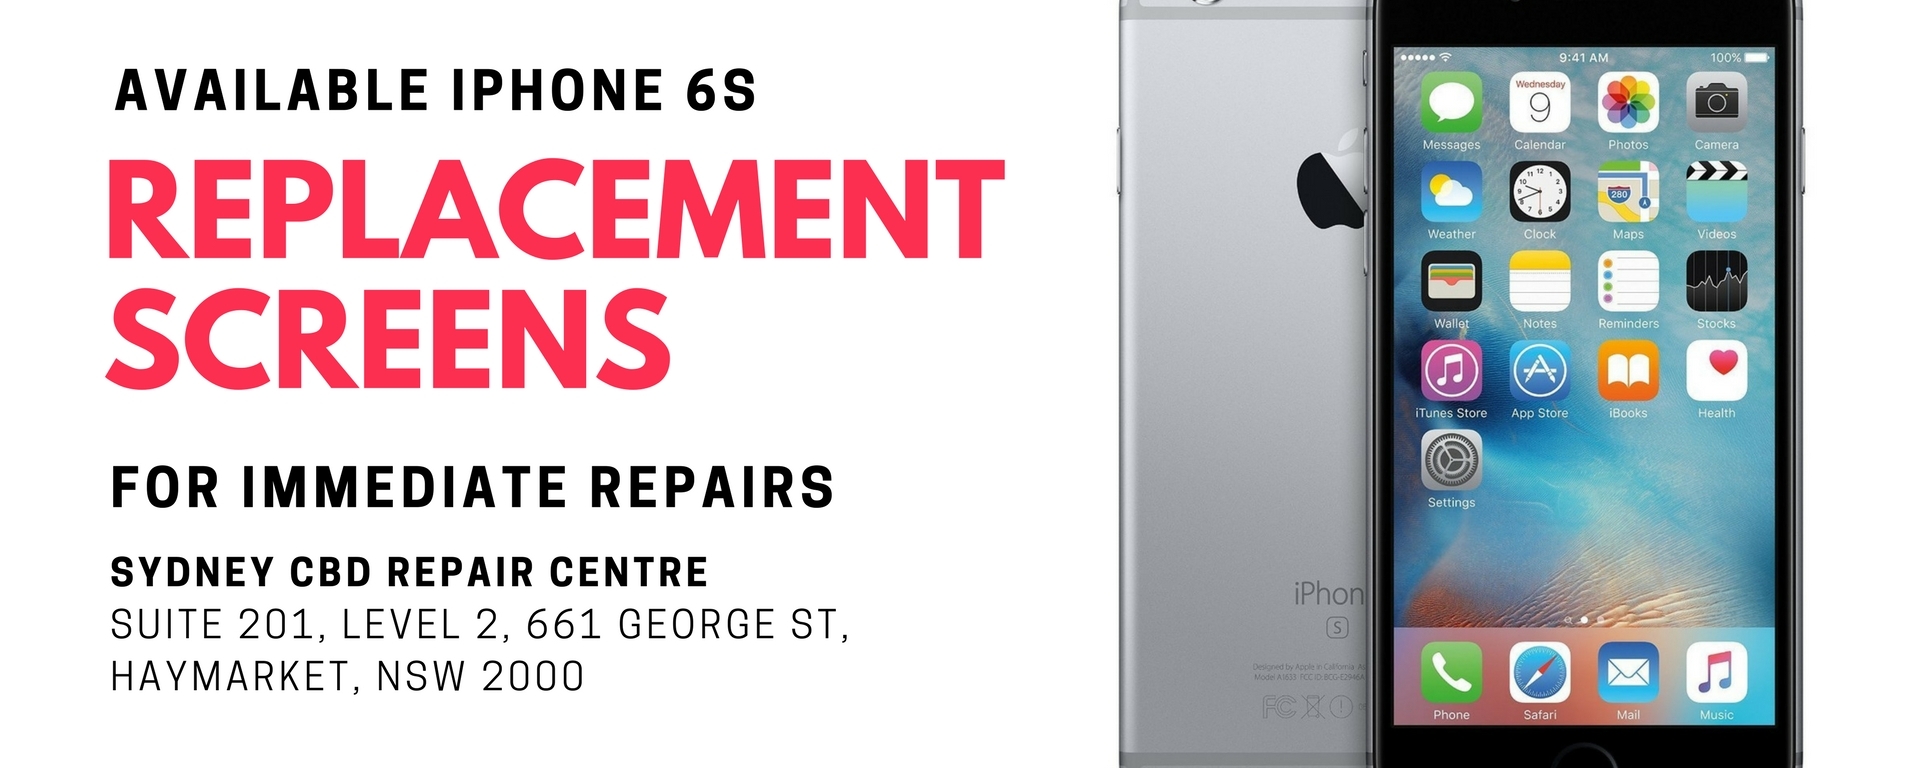 iPhone 6s Replacement Screens